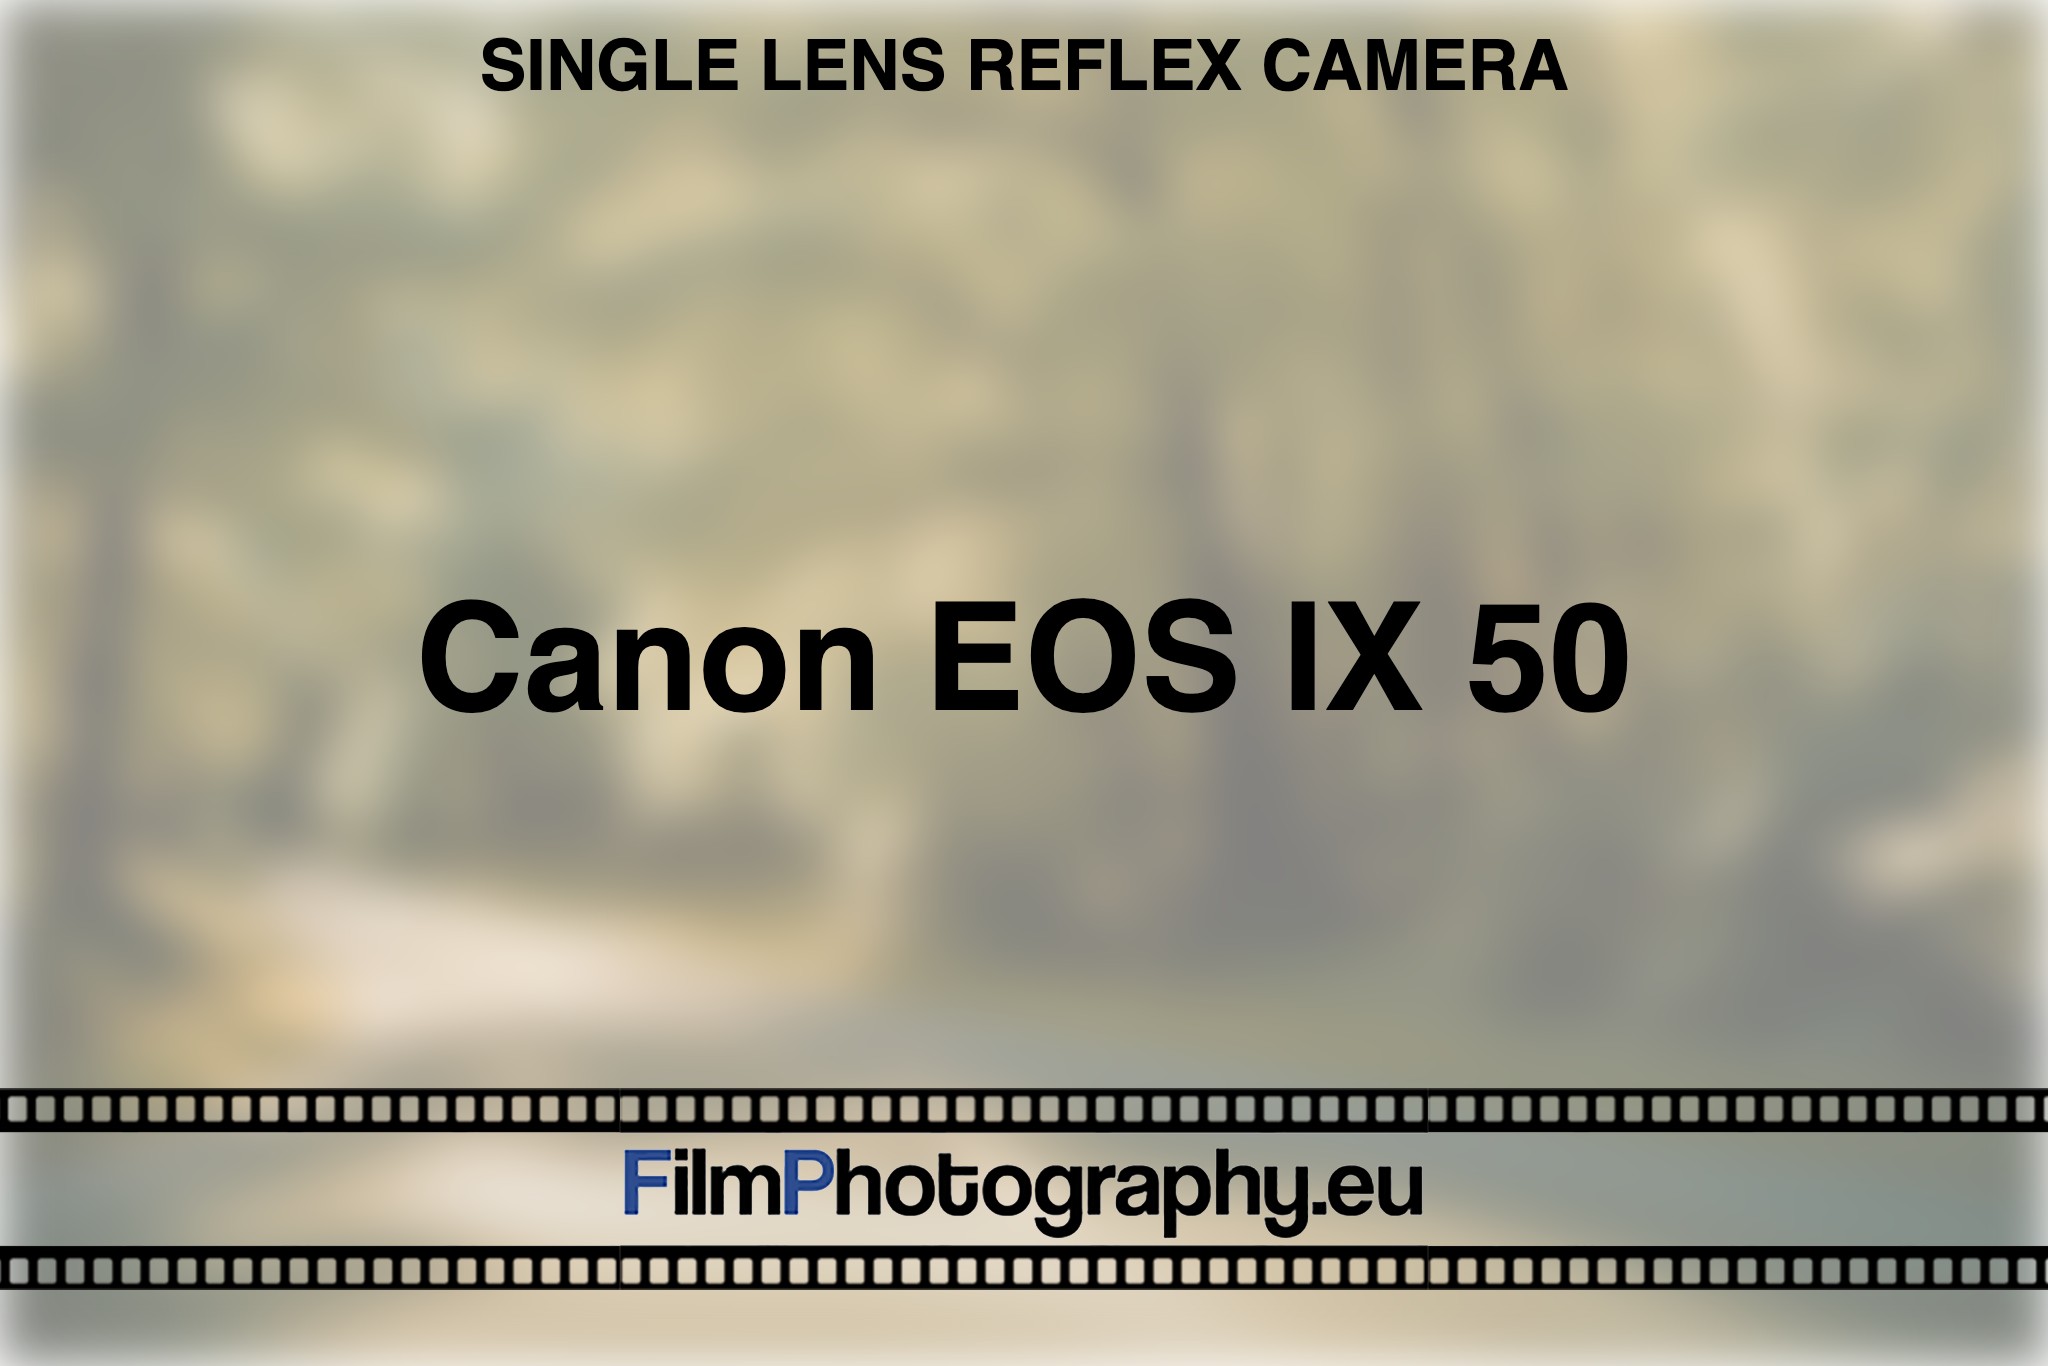 Canon EOS IX 50 - Background to films, batteries and the camera